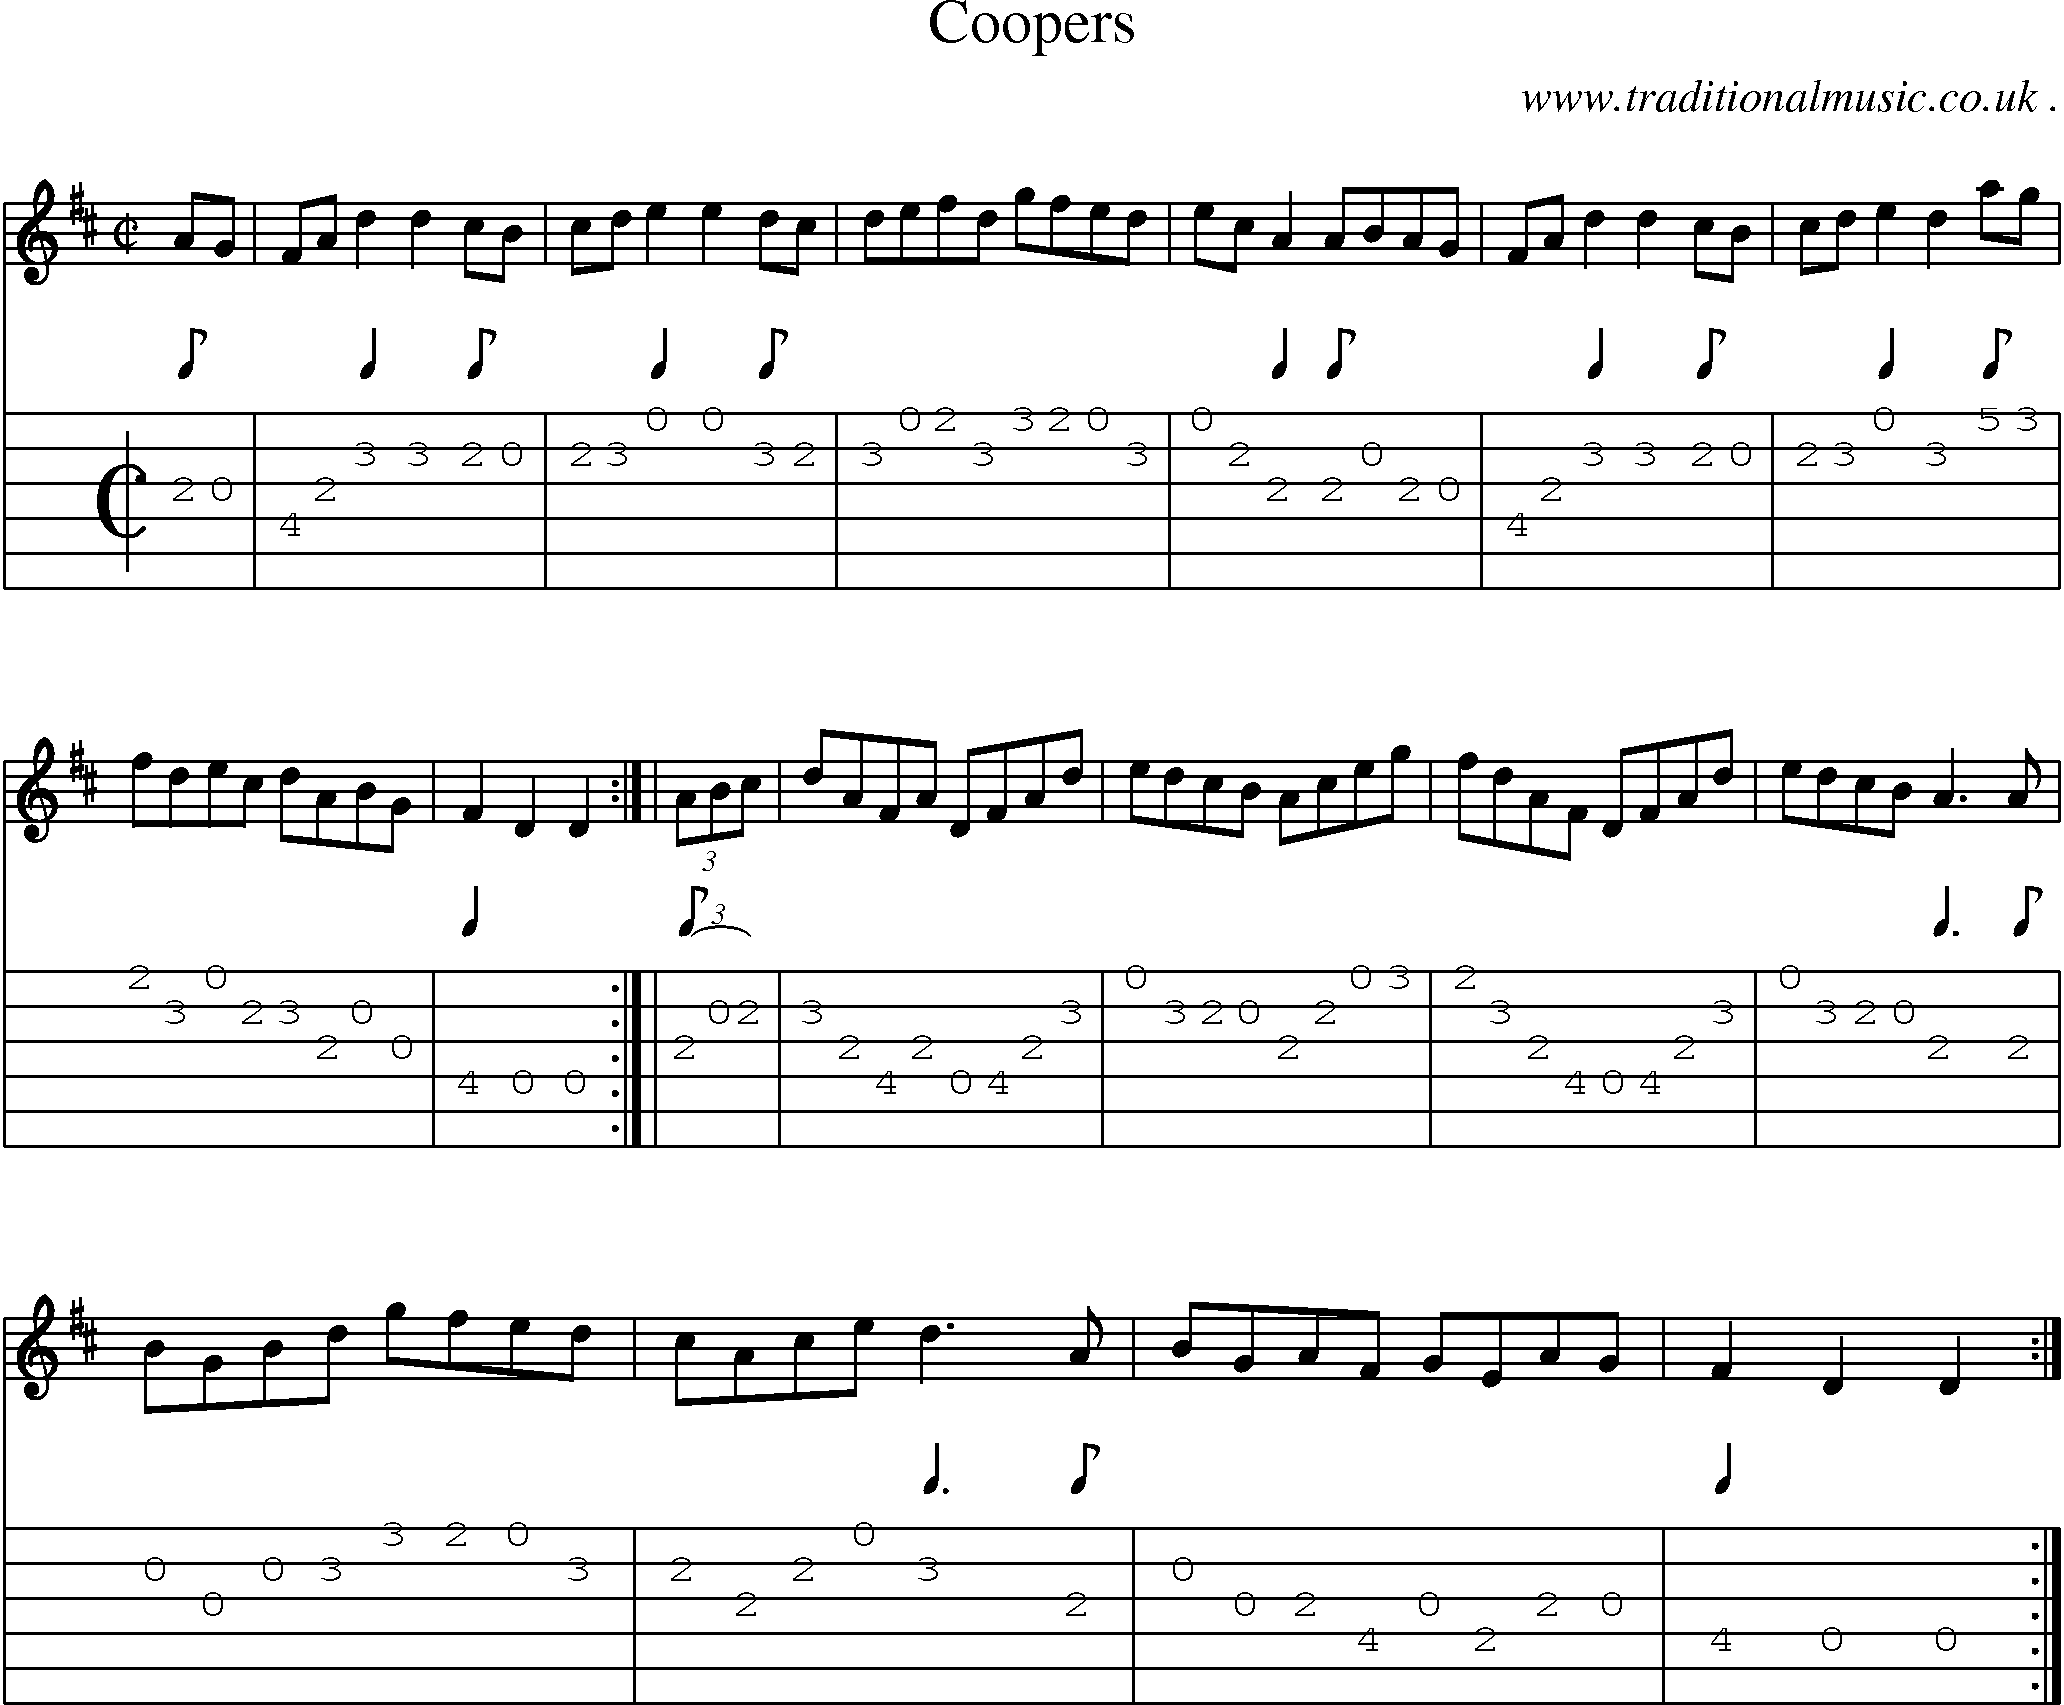 Sheet-music  score, Chords and Guitar Tabs for Coopers